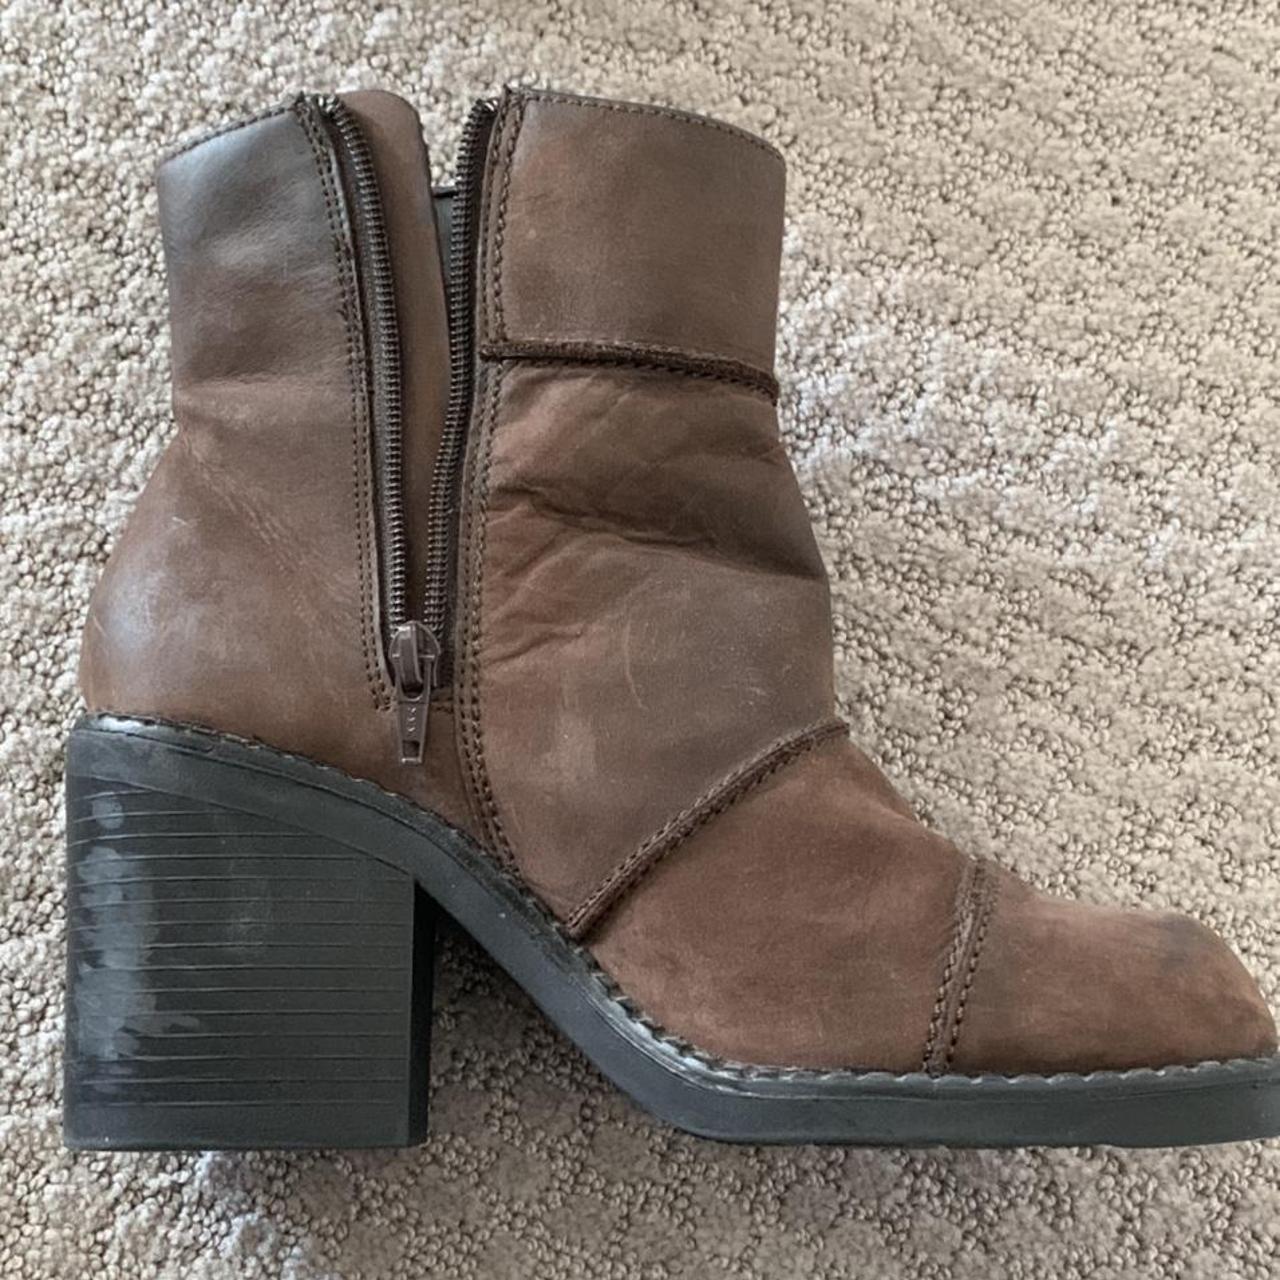 Union Bay Women's Brown Boots (2)